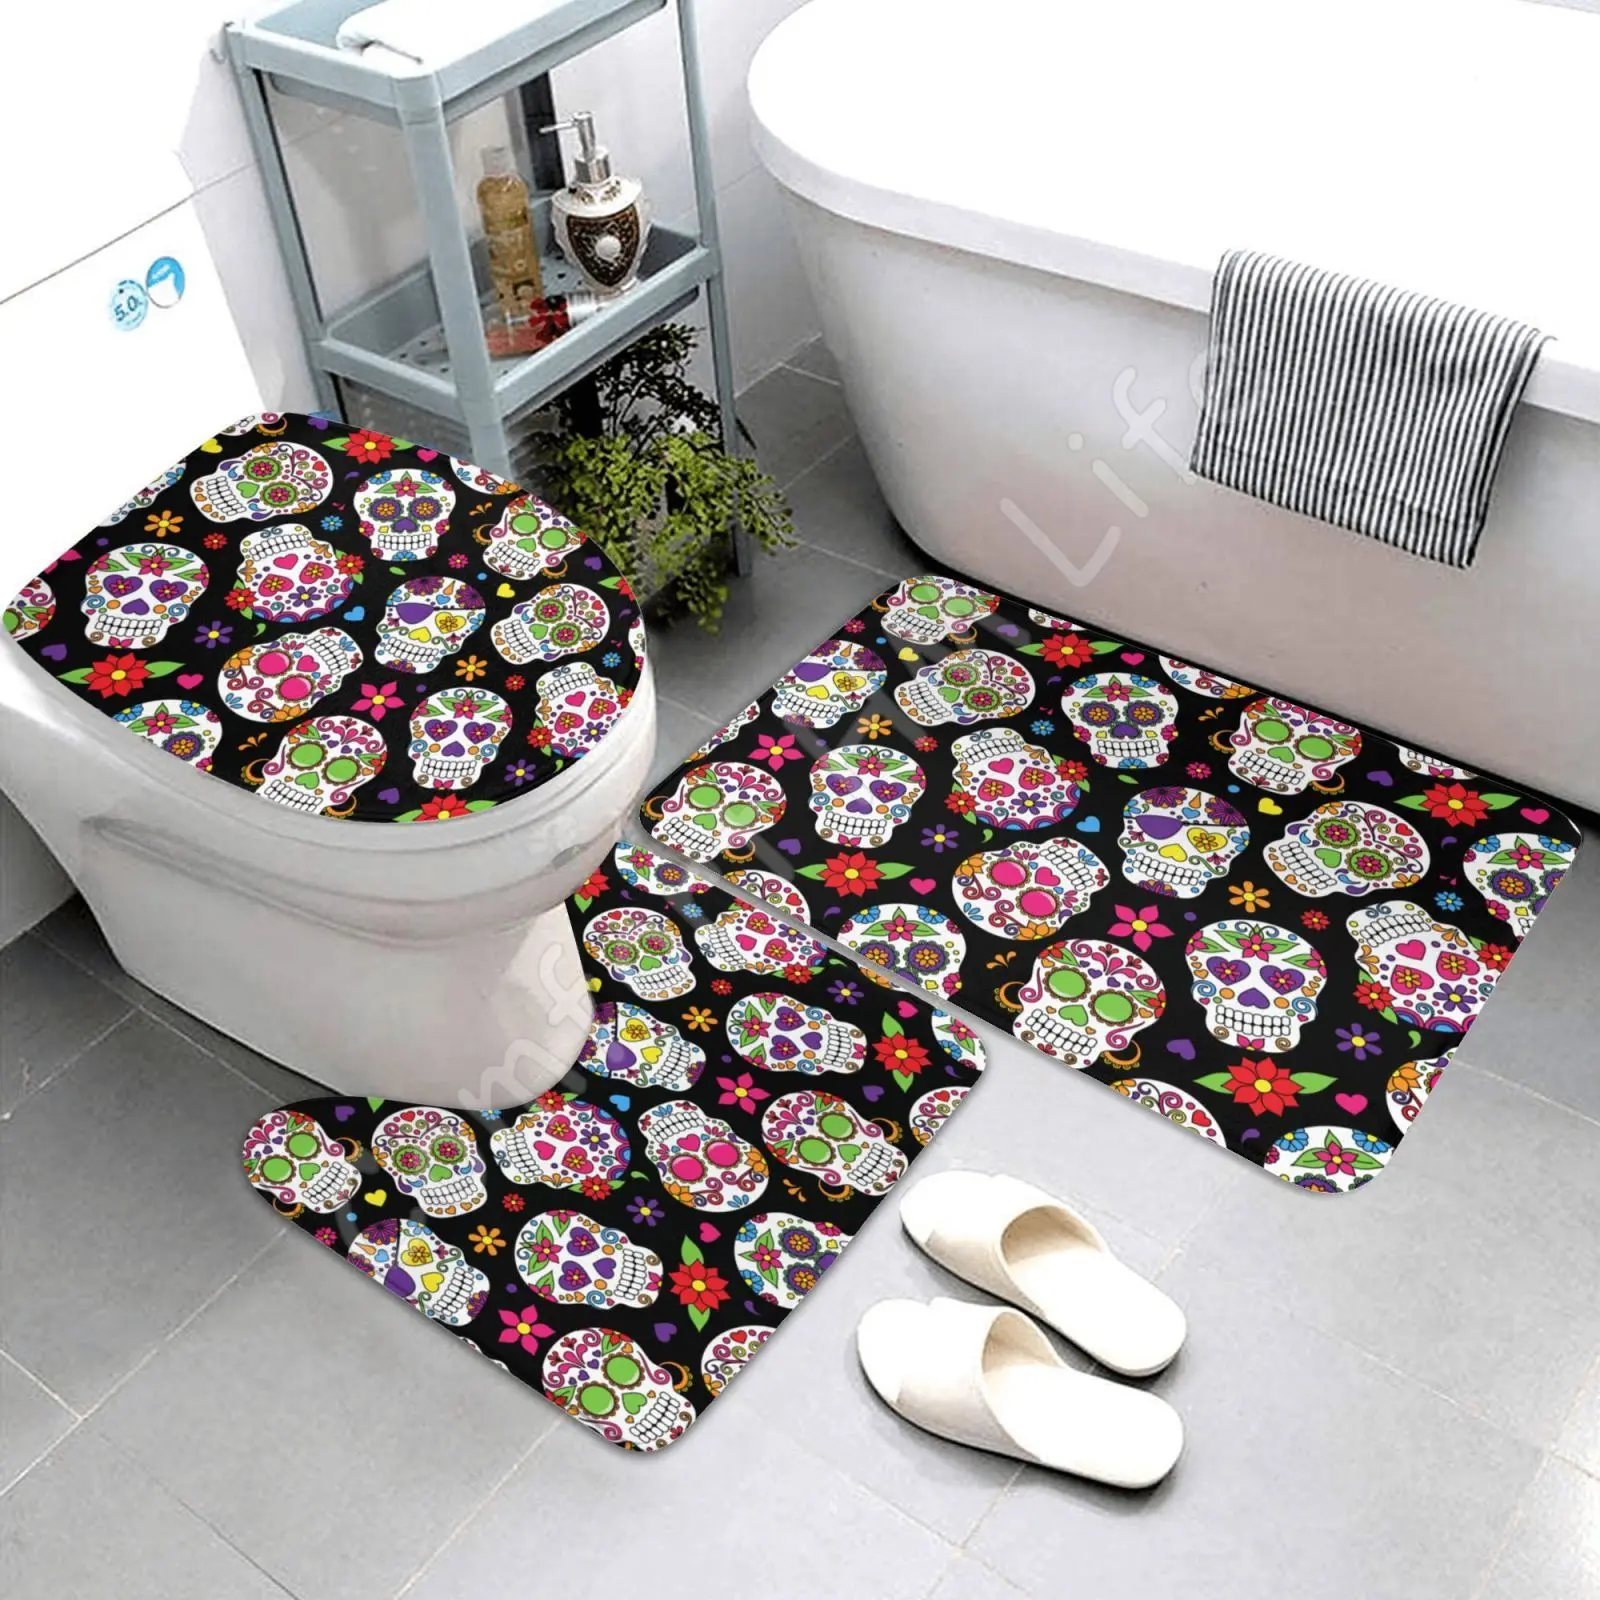 https://ae01.alicdn.com/kf/S0d1f593f45604bee8f17601223a1b3cf9/3-Piece-Toilet-Cover-Day-Of-The-Dead-Sugar-Skull-Bathroom-Rug-Set-Contour-Lid-Cover.jpg